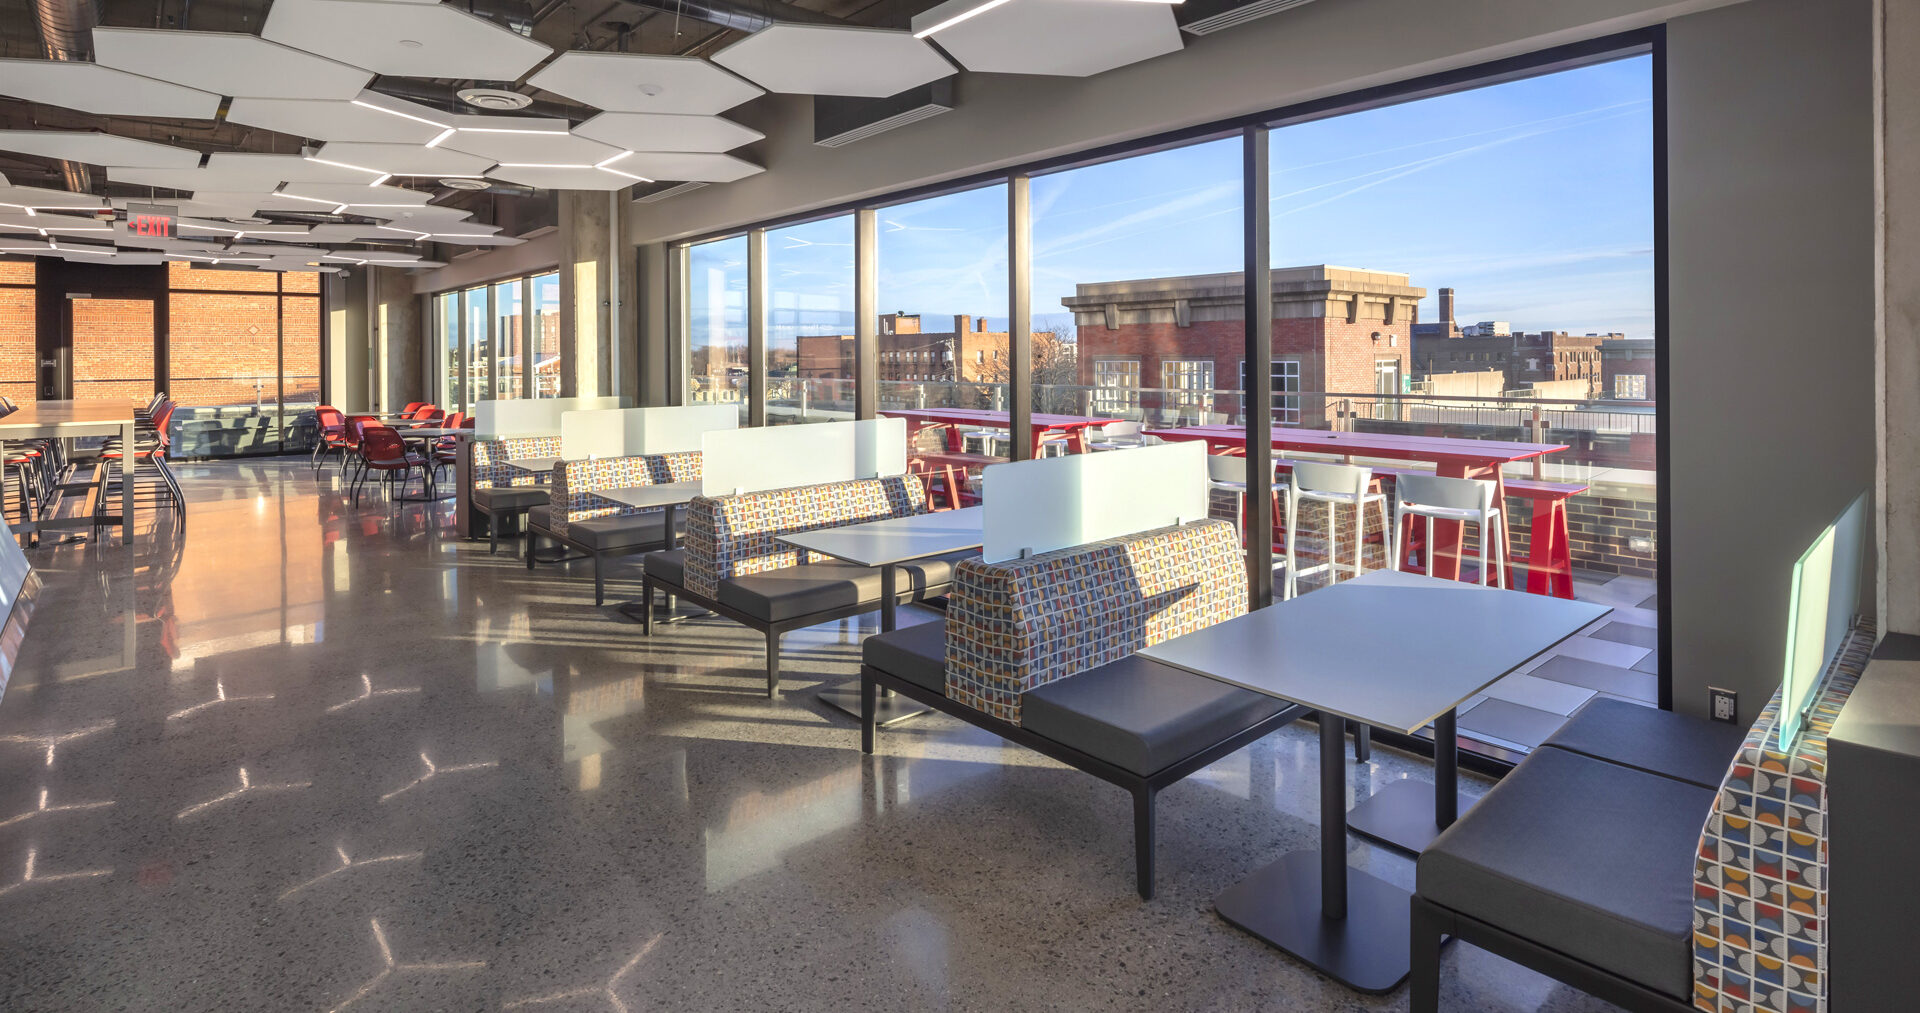 NBS_Baker_College_Commons